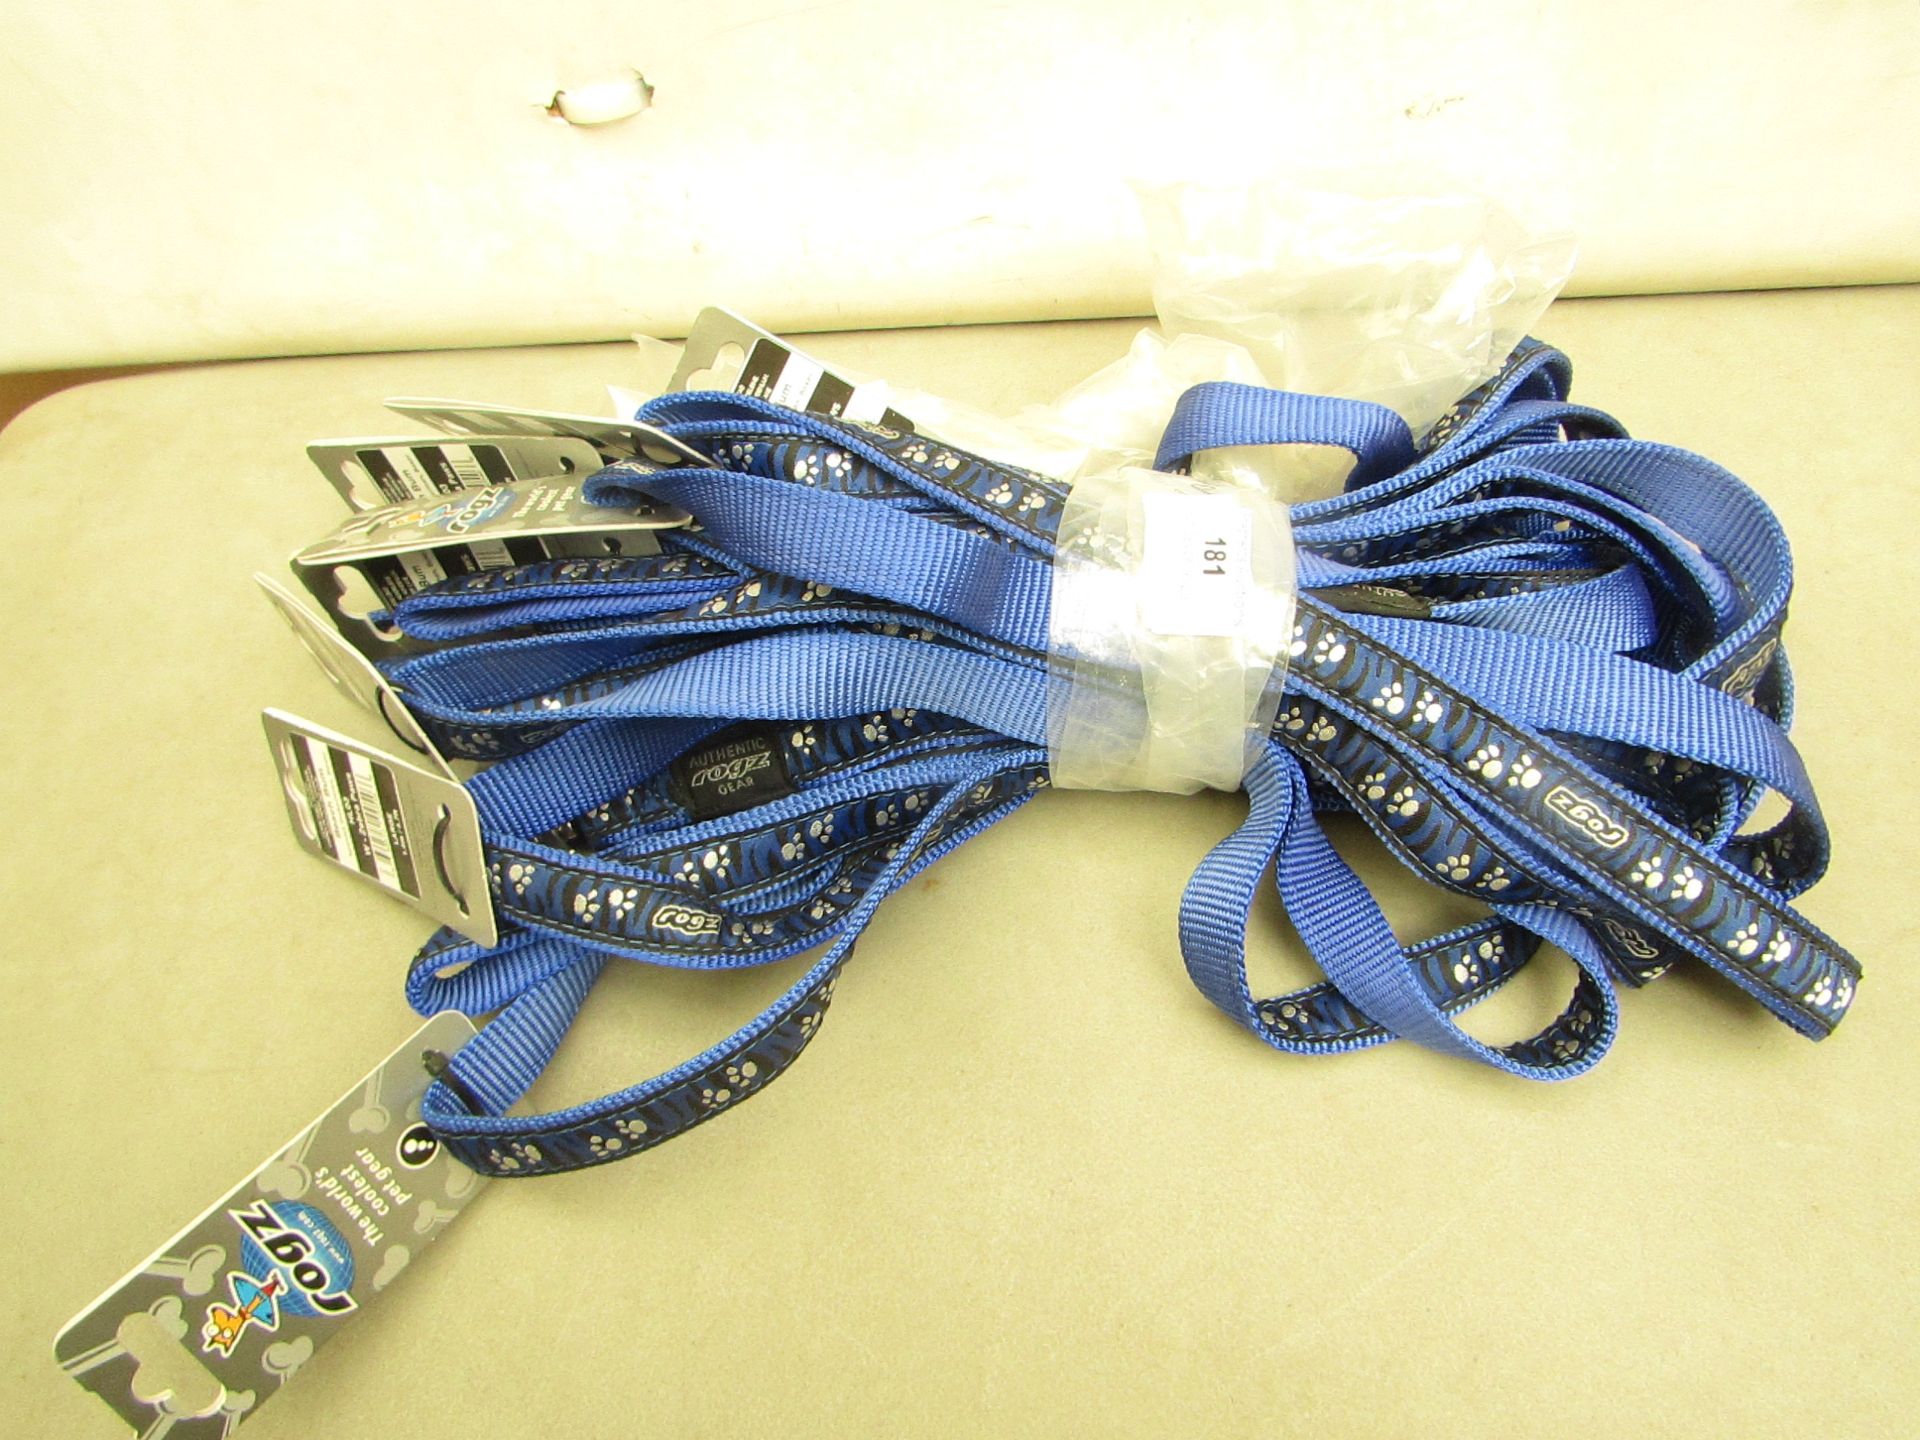 7 x Rogz Beach Bum large Dog leads. New with tags